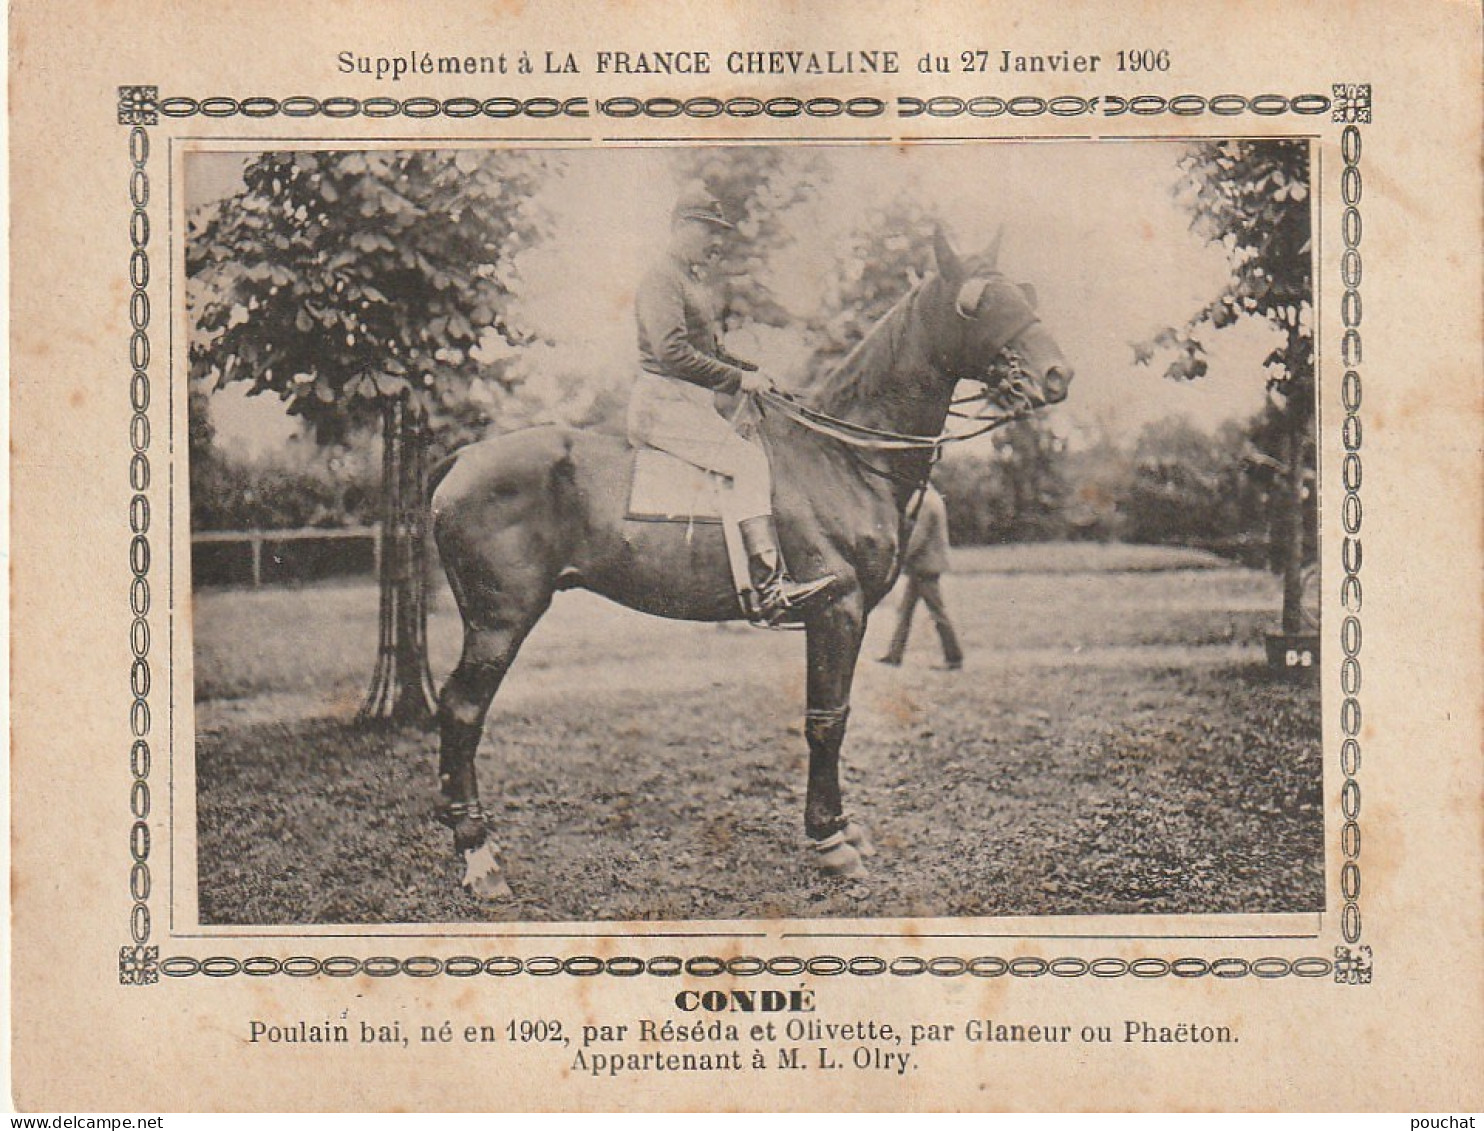 AA+ - " CONDE " - JUMENT BAIE  APPARTENANT A M. L. OLRY - SUPPL. FRANCE CHEVALINE JANVIER 1906 - Horse Show